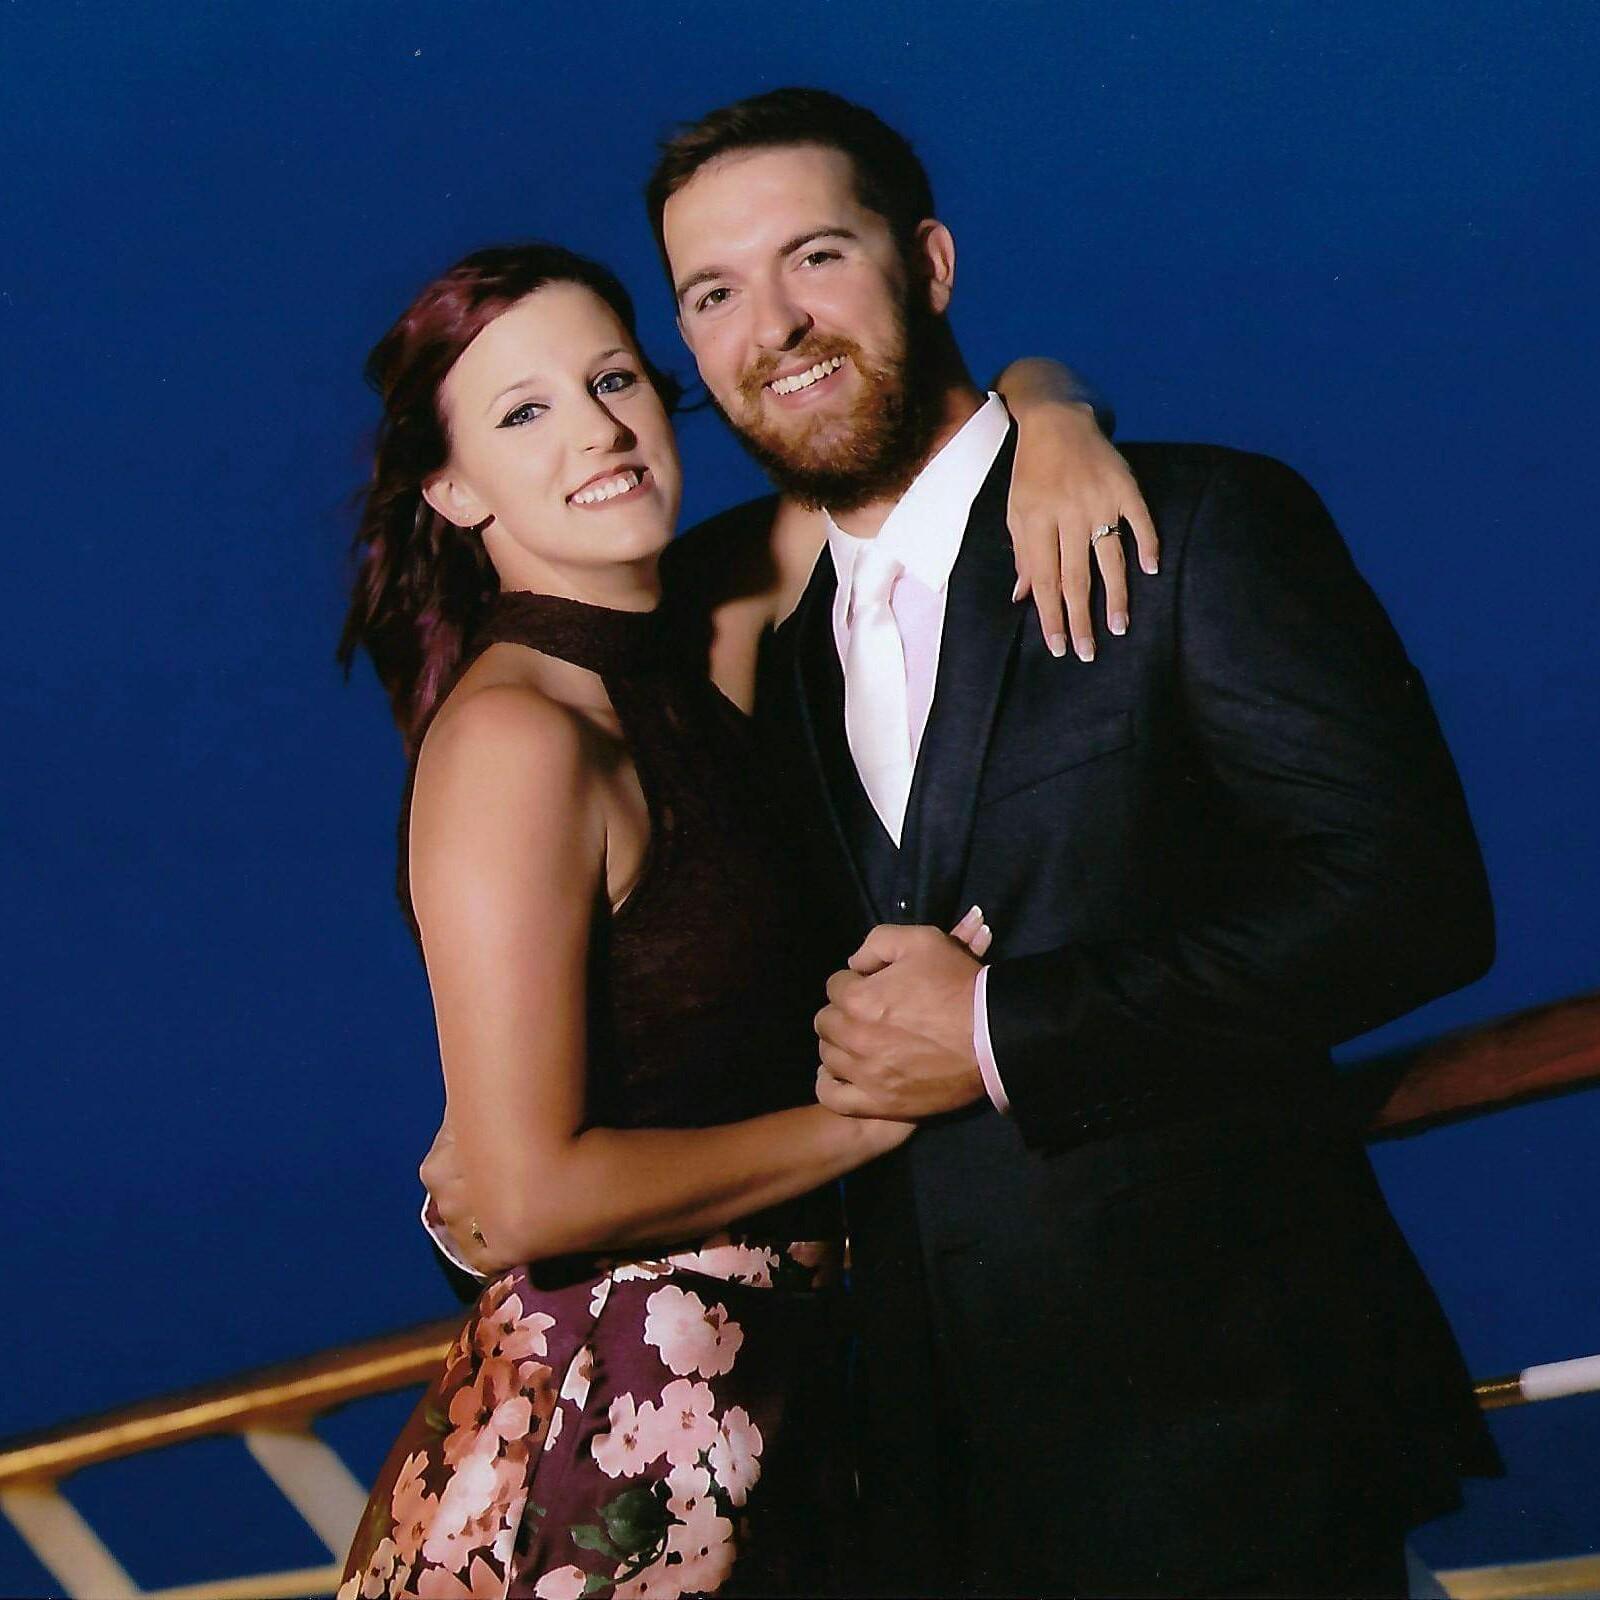 We did a "Dream Photo Shoot" to celebrate our engagement on our cruise!